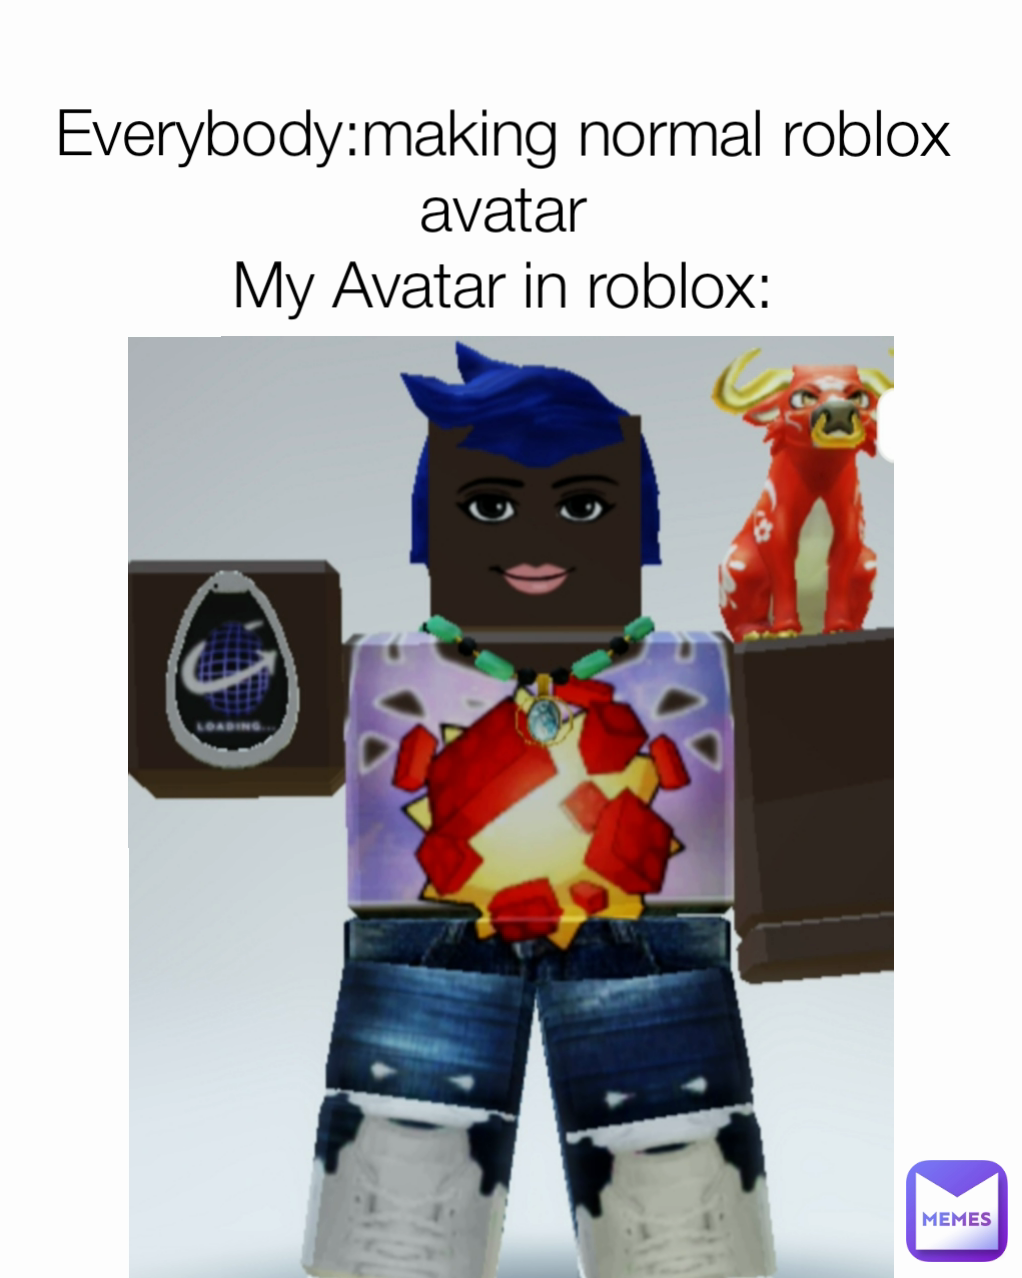 Everybody:making normal roblox avatar
My Avatar in roblox: